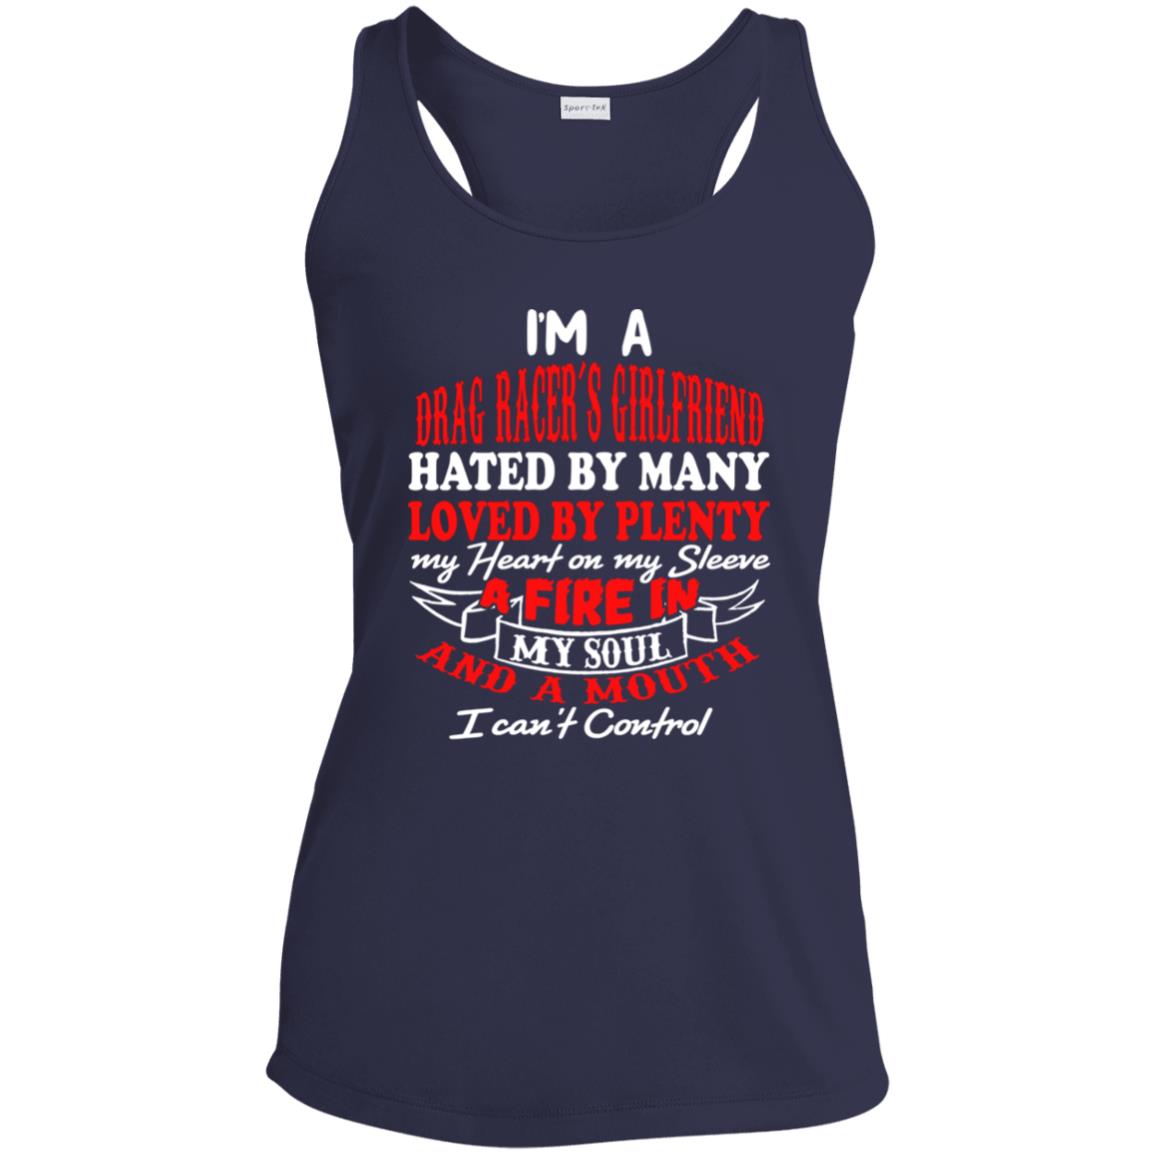 I'm A Drag Racer's Girlfriend Hated By Many Loved By Plenty Ladies' Performance Racerback Tank